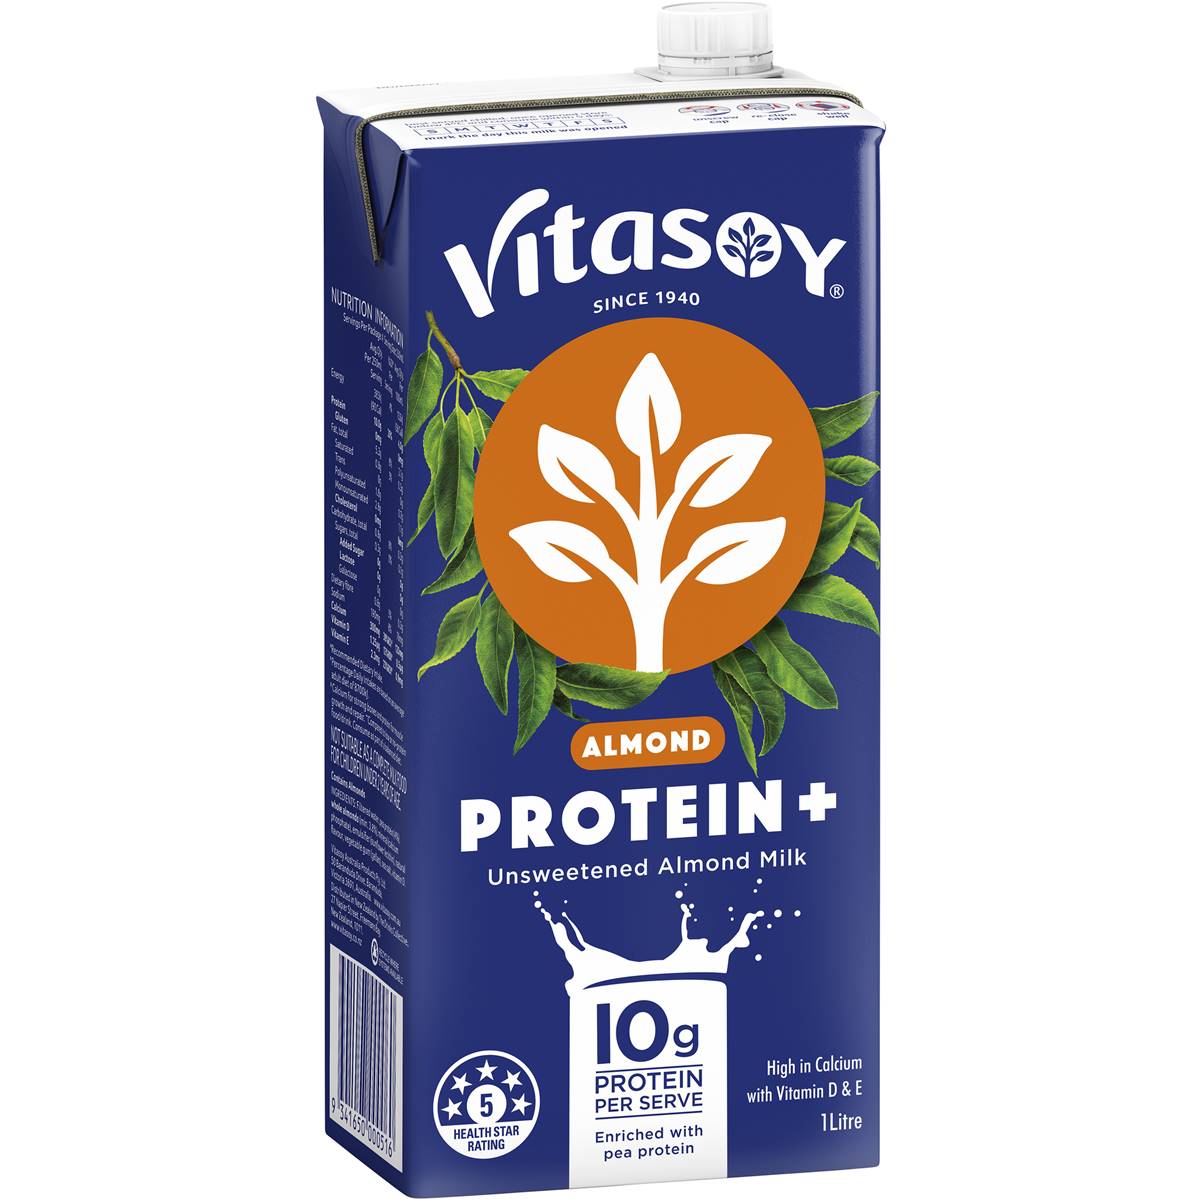 Calories in Vitasoy Almond & Protein Unsweetened Milk